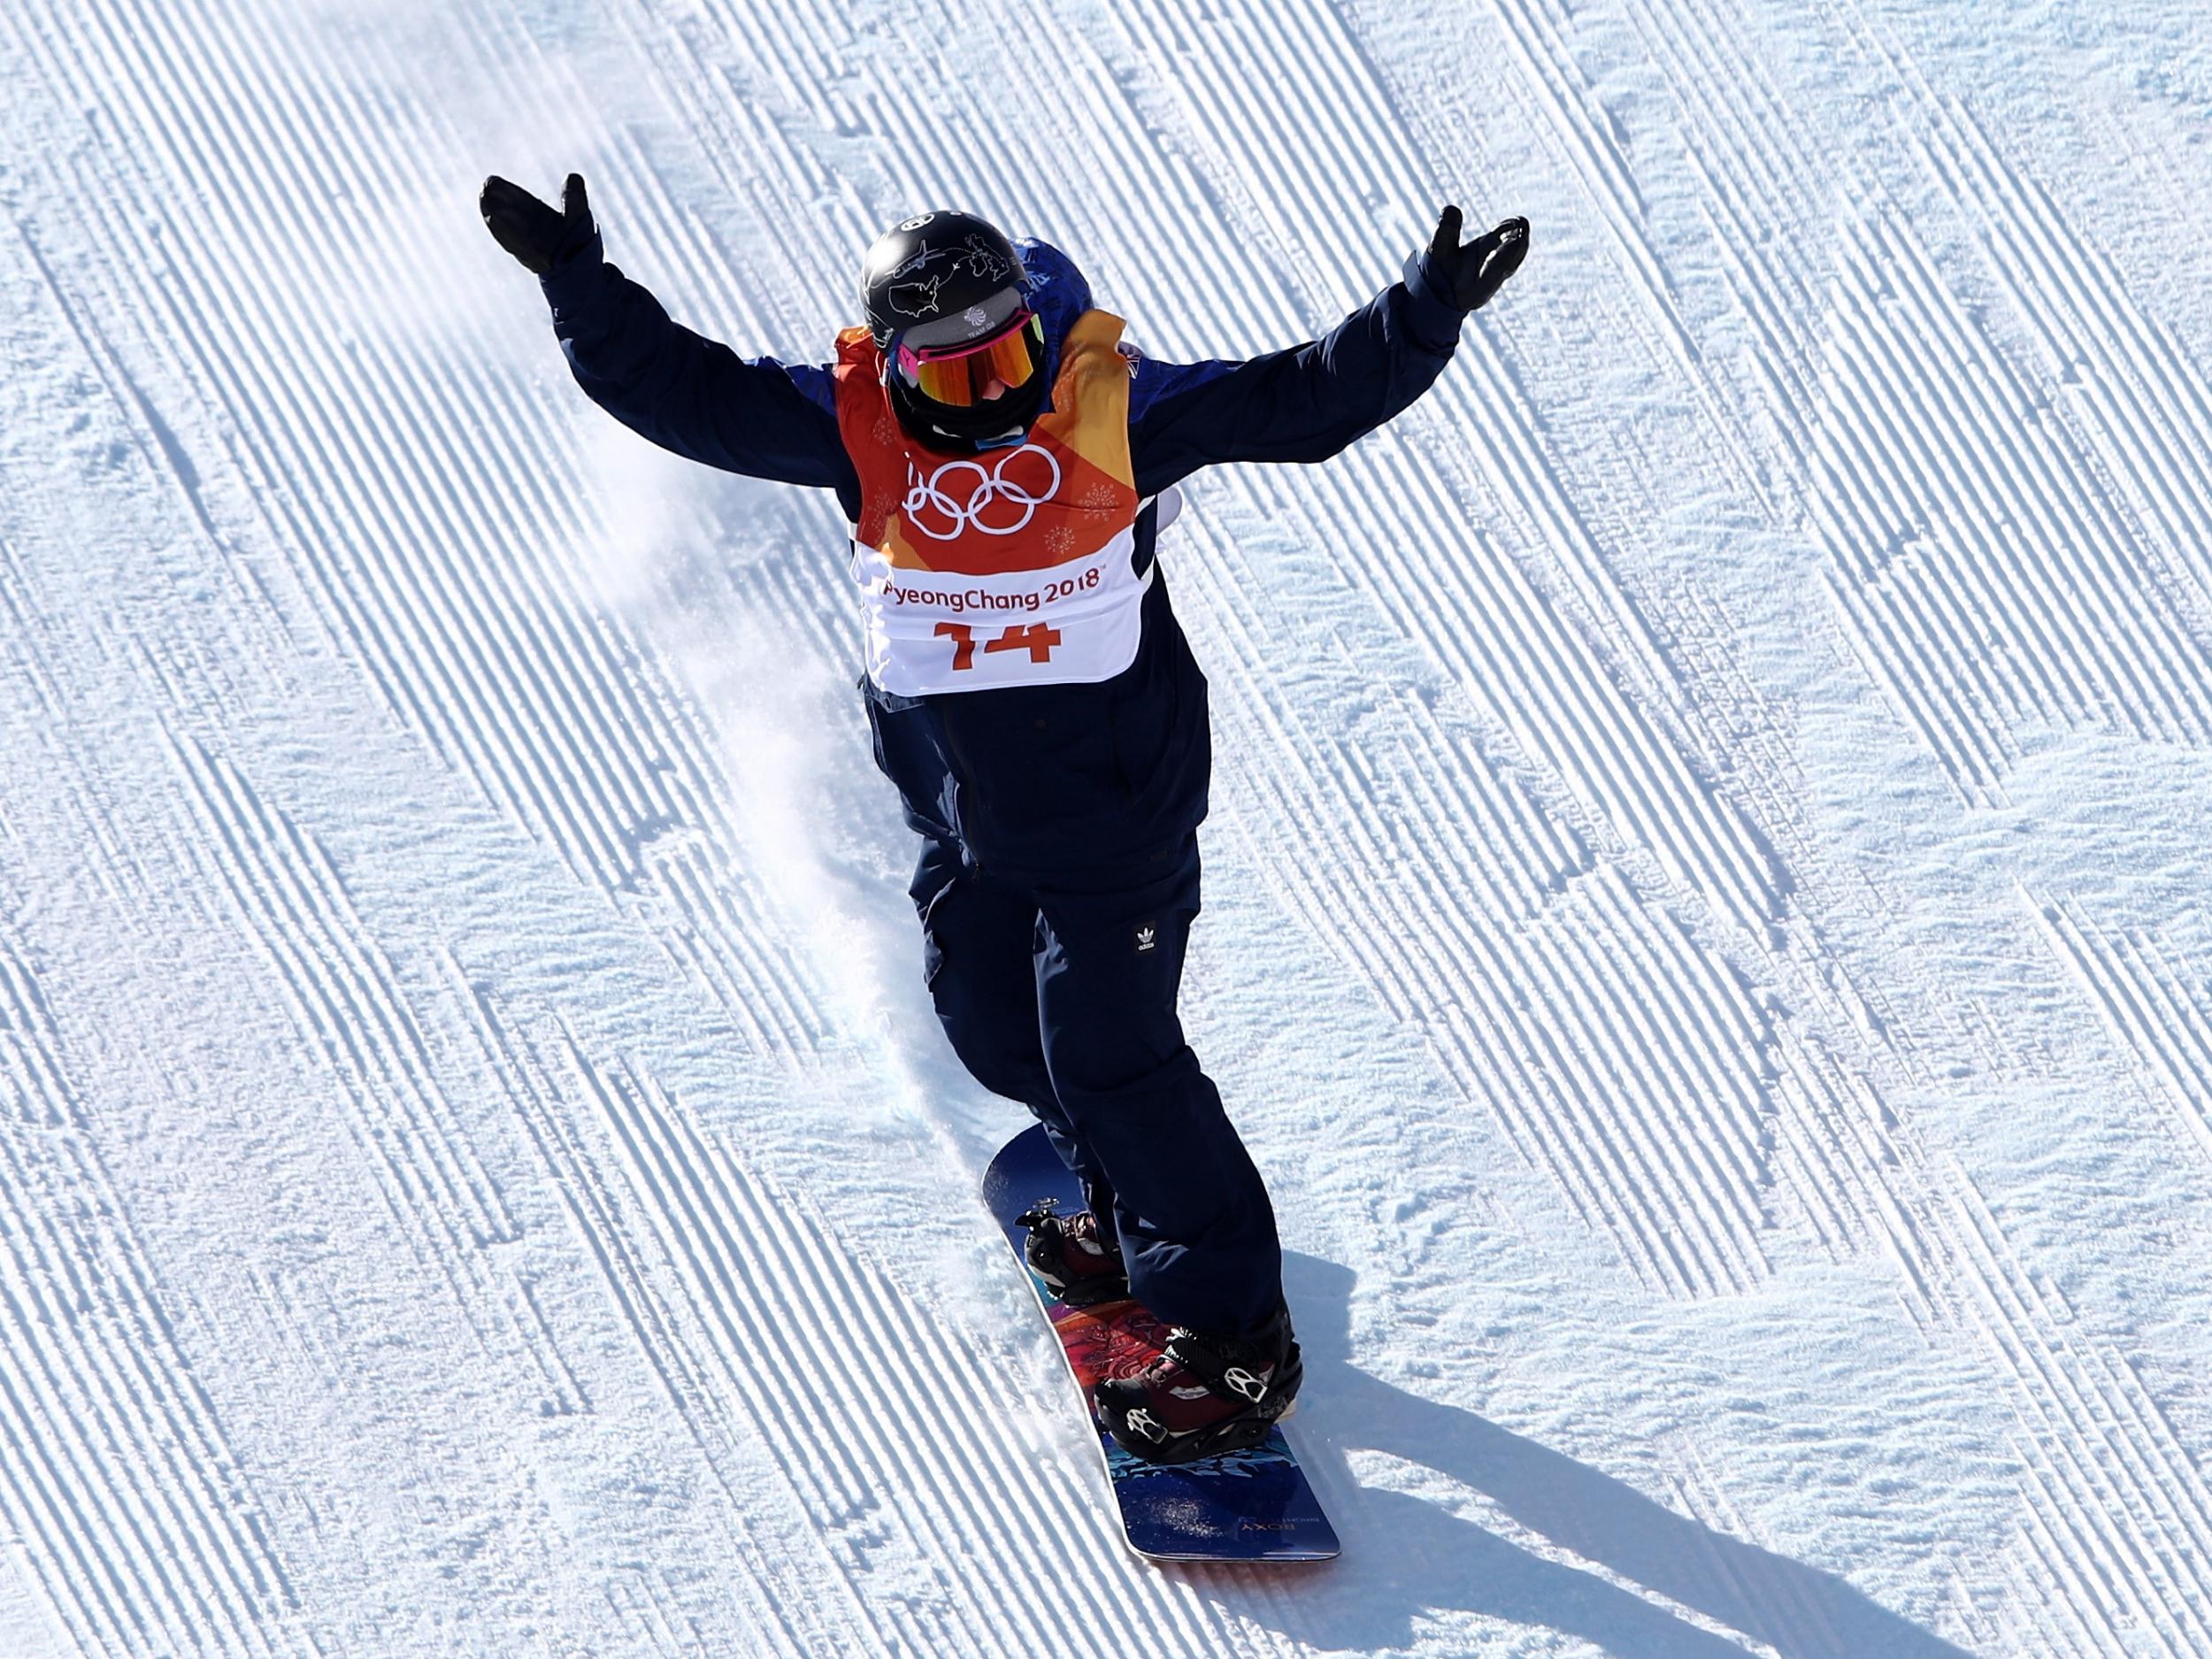 Fuller finished 17th in the snowboard slopestyle